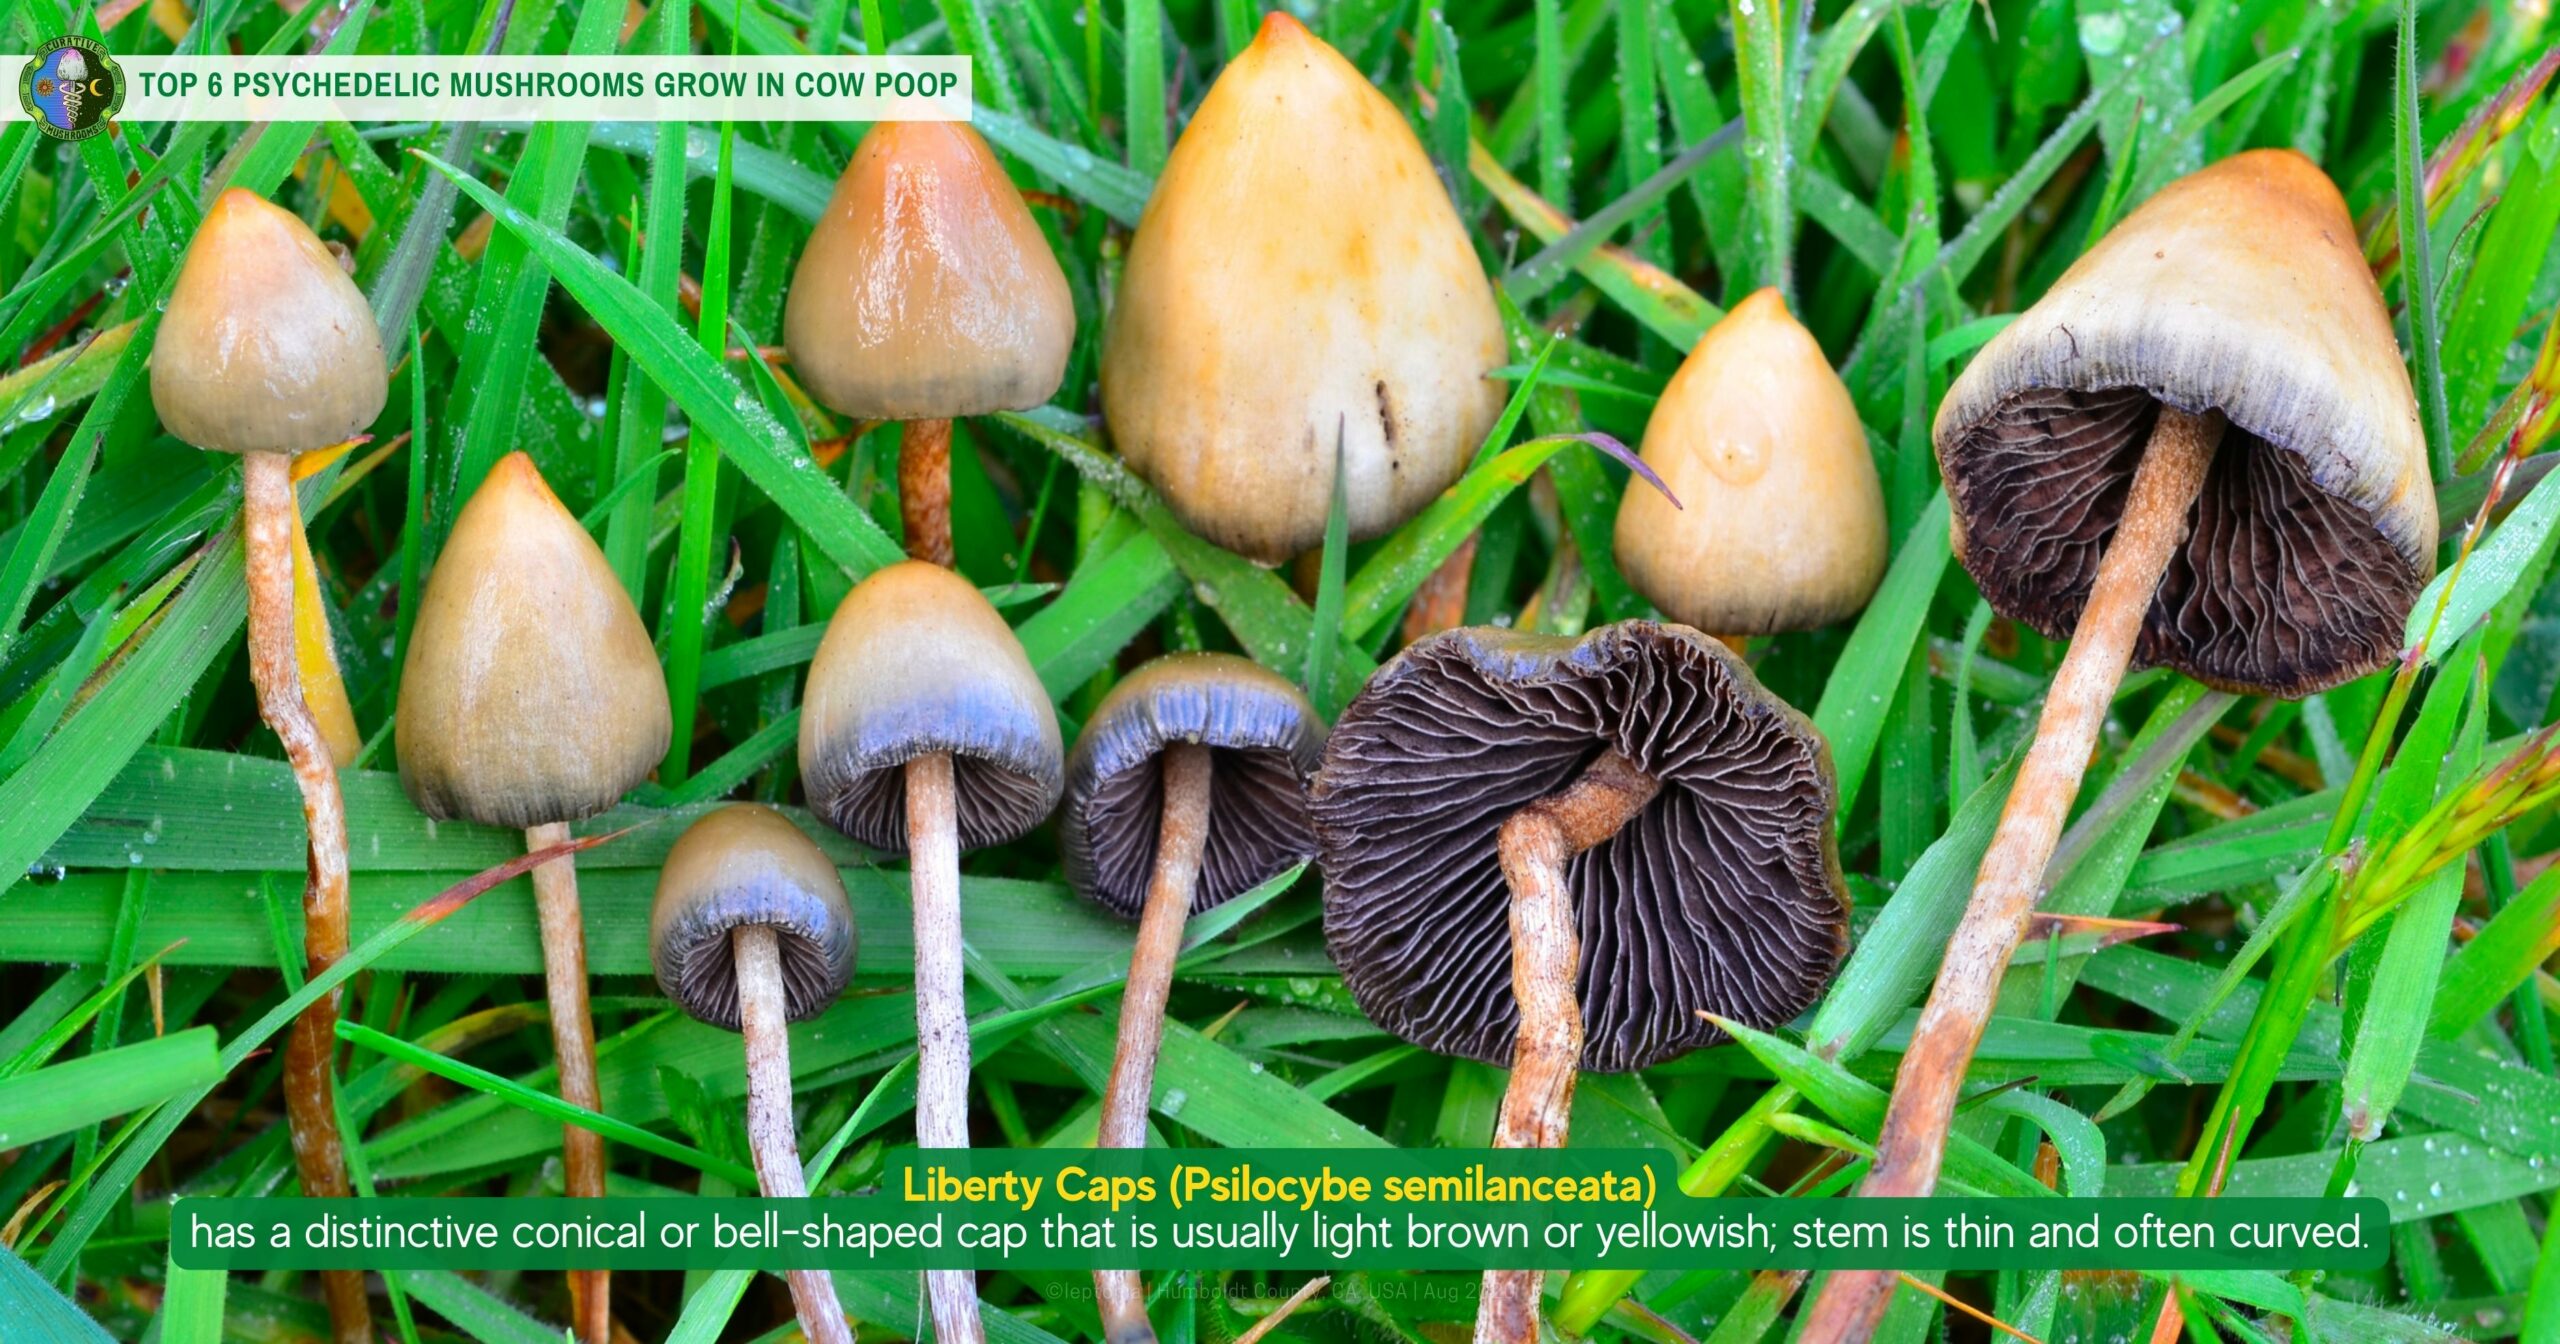 cow poop pasture mushroom - Liberty Caps Psilocybe semilanceata - distinct conical or bell-shaped cap light brown or yellowish, stem is thin and often curved